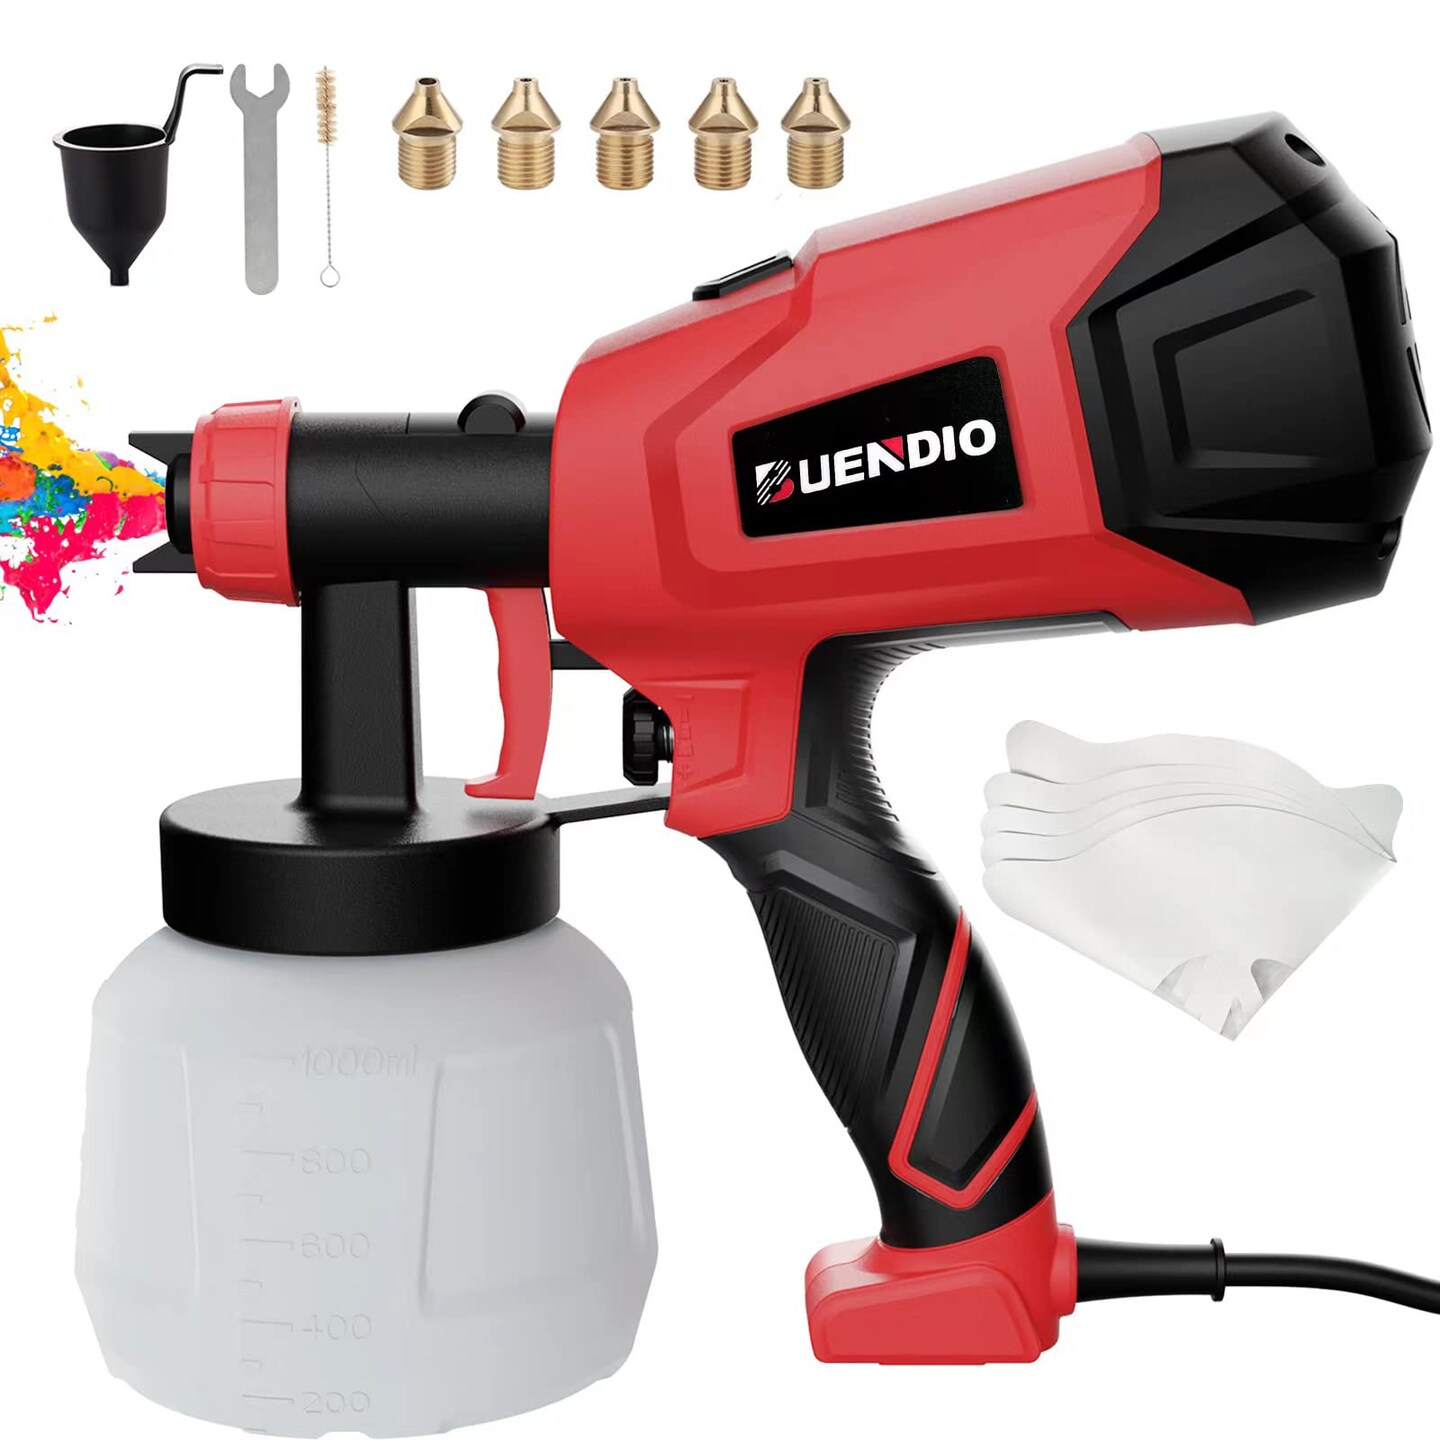 BUENDIO Paint Sprayer, 700W High Power, 5 Copper Nozzles &#x26; 3 Patterns, Easy to Clean, HVLP Spray Gun for Furniture, Cabinets, Fence, Garden Chairs, Walls, DIY Works etc. TPX01 Red